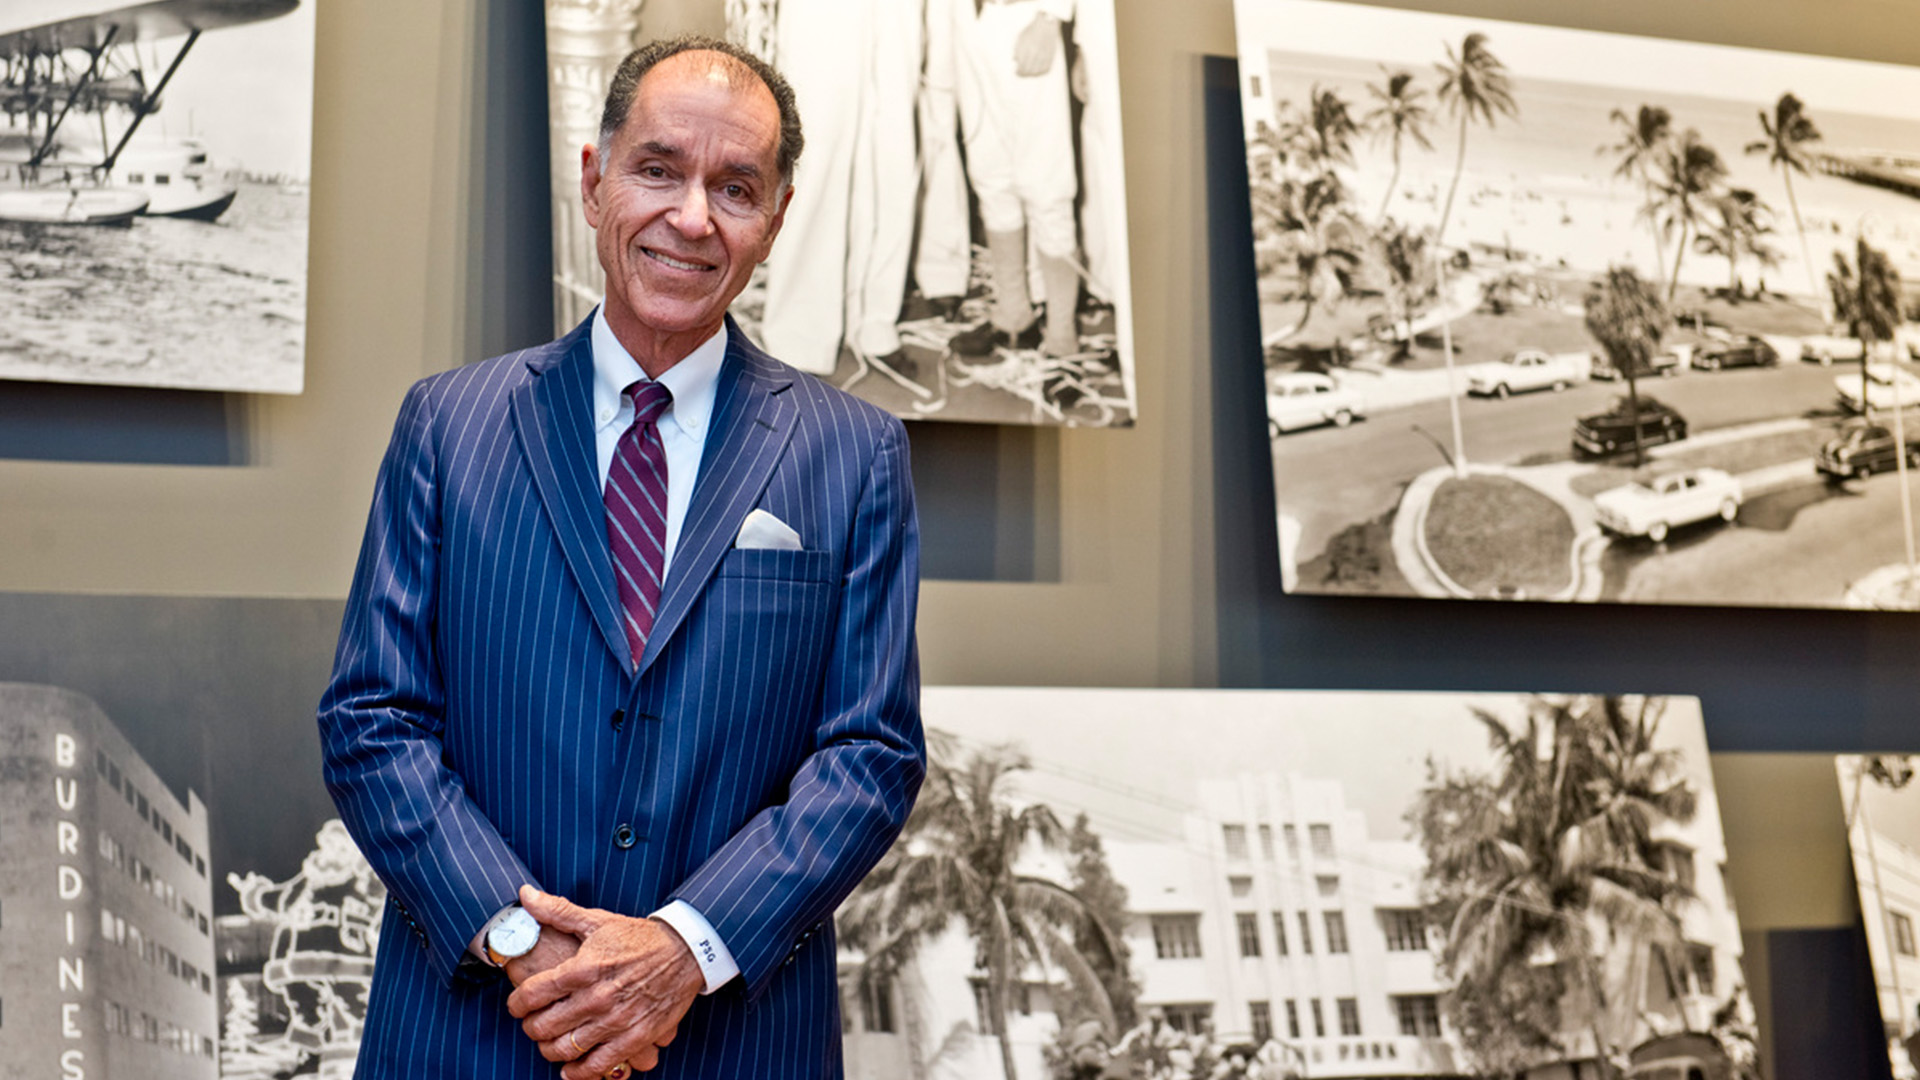 Dr. George, wearing a blue pinstripe suit, burgundy striped tie, and white shirt stands in front of a gallery of black and white archival images against a gray wall.